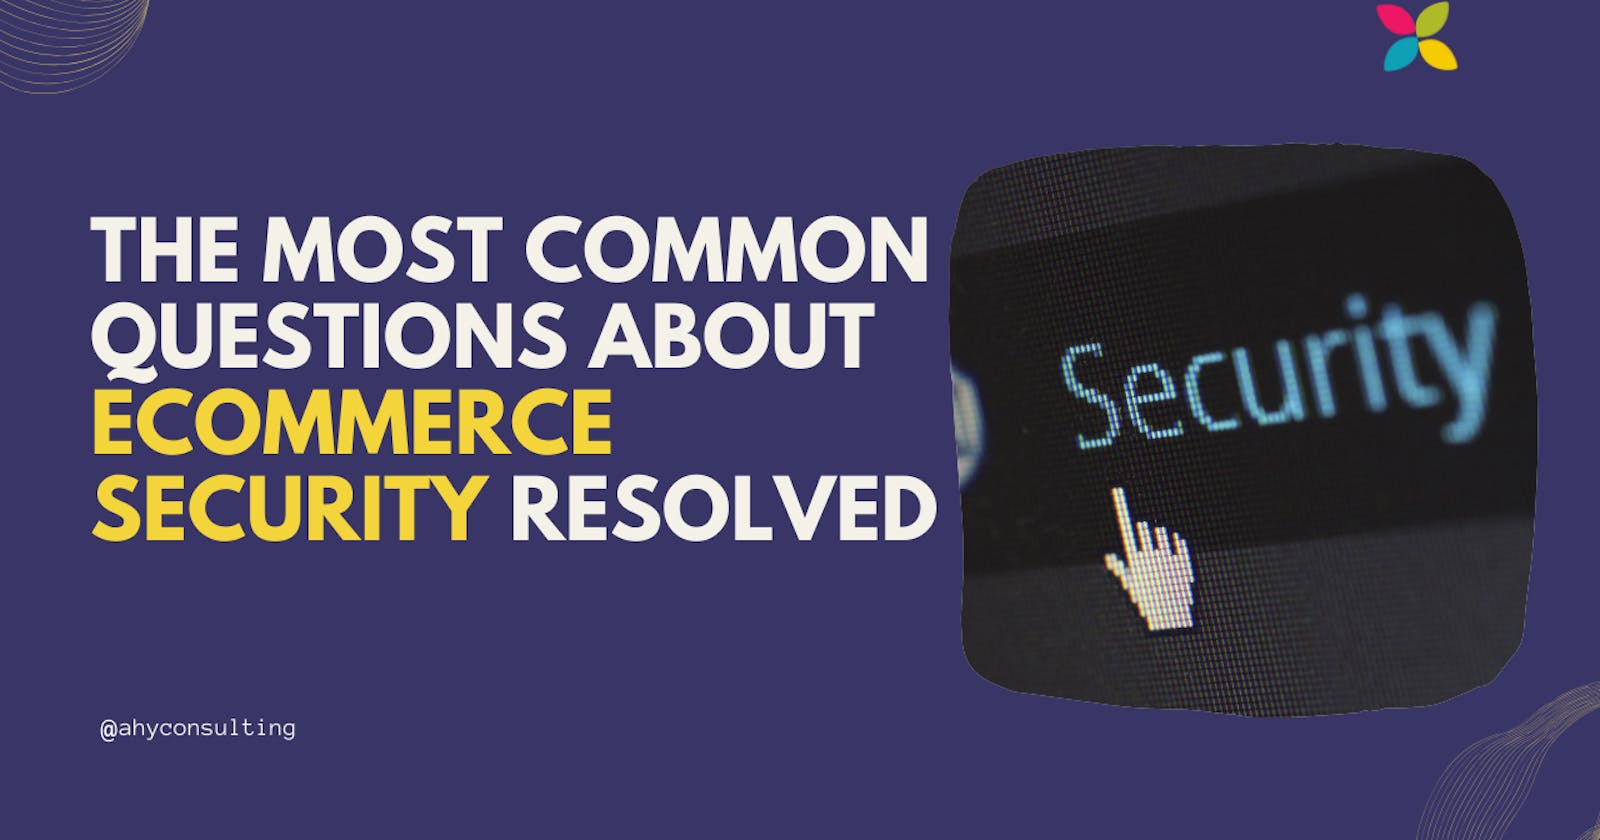 The Most Common Questions About eCommerce Security Resolved